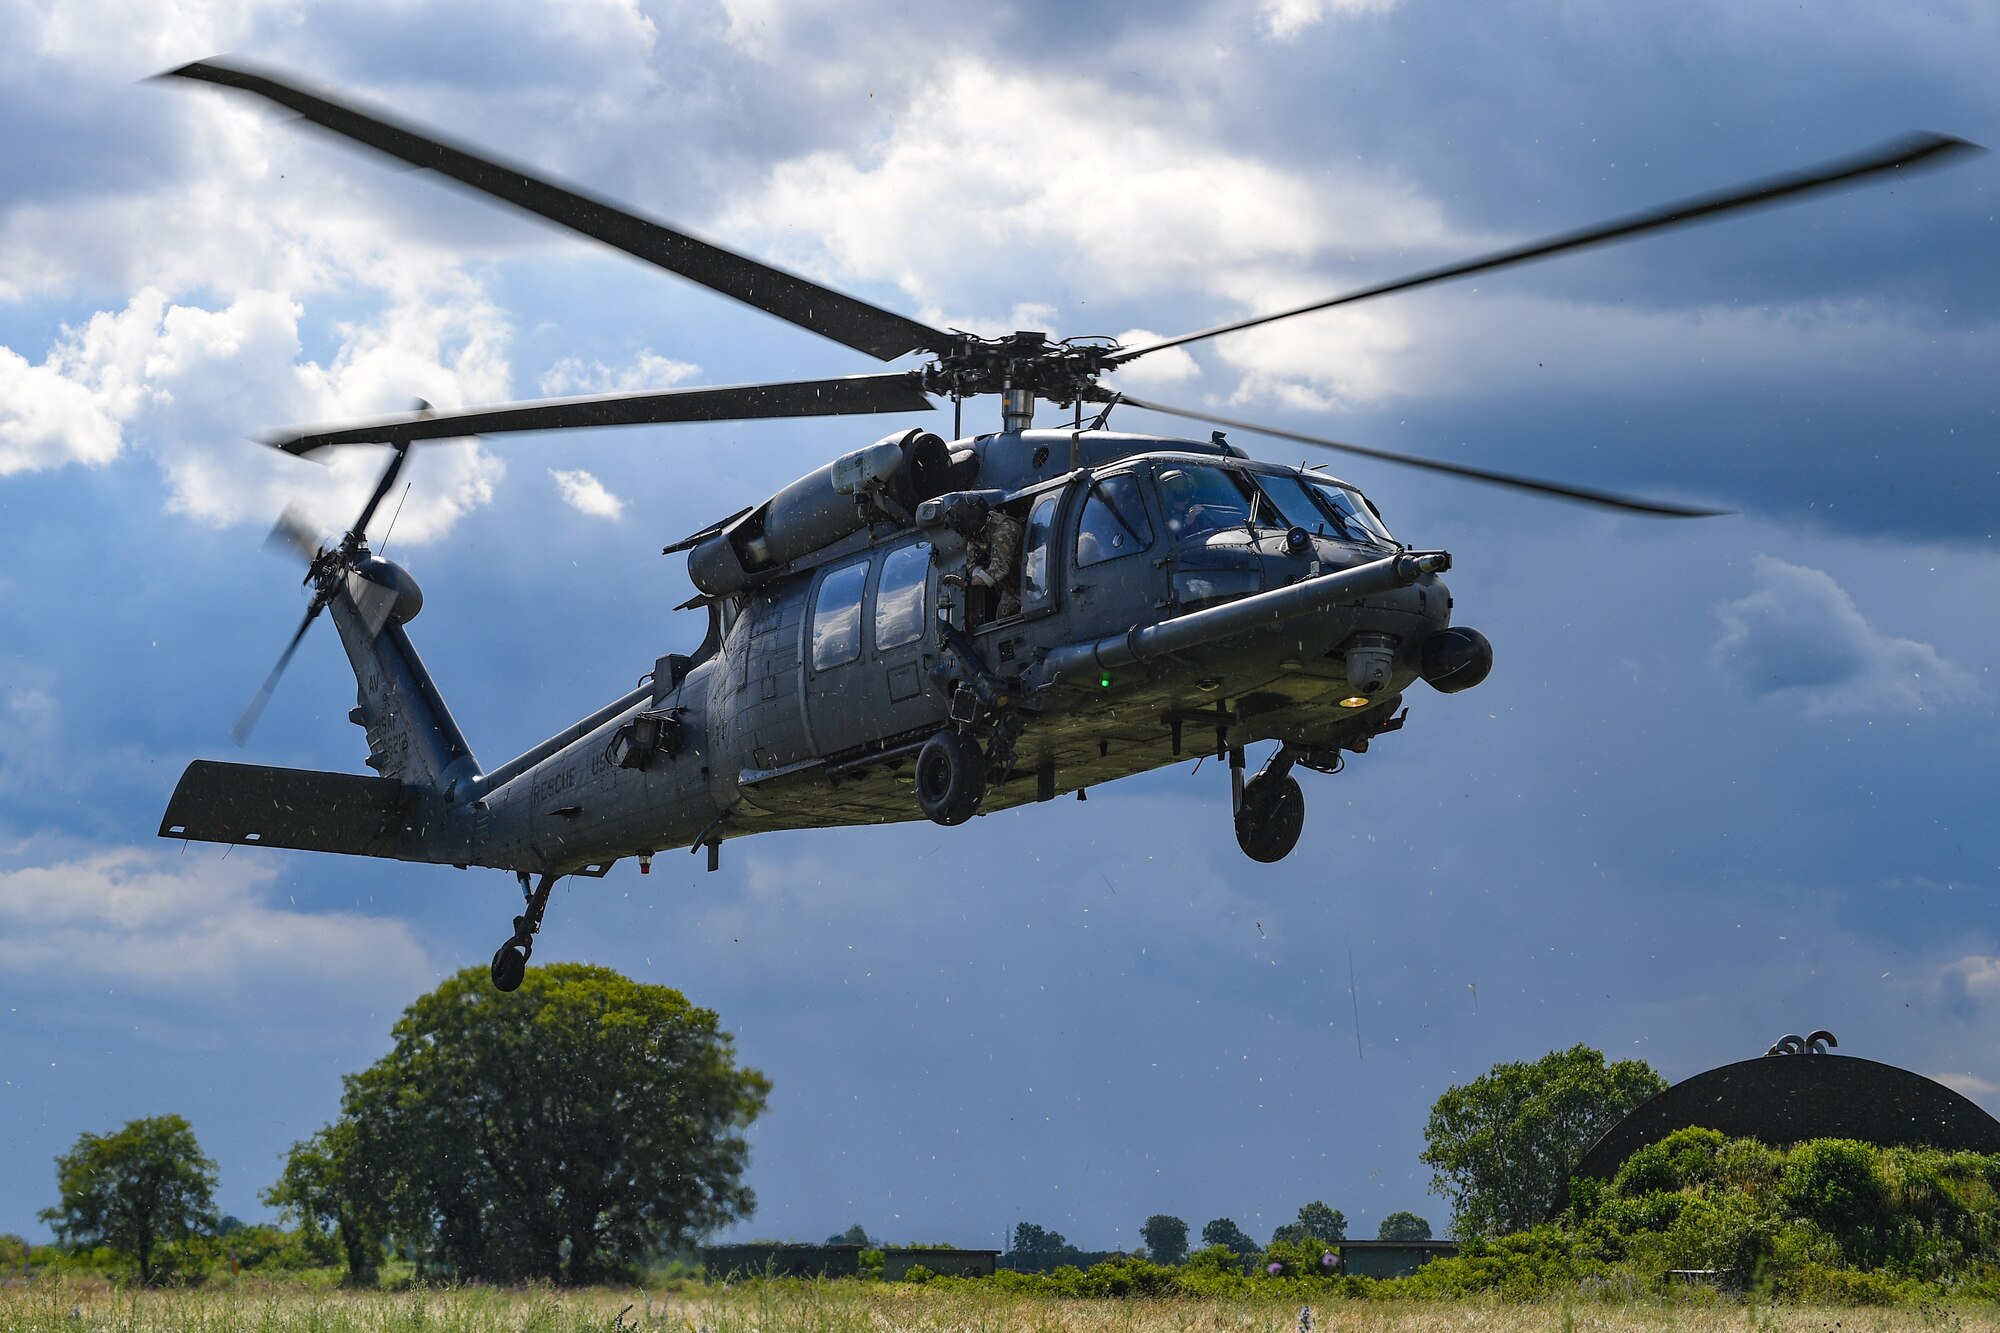 A U.S. Air Force HH-60G Pave Hawk helicopter assigned to the 56th Rescue Squadron comes in for a landing during an exercise at Rivolto Air Base, Italy, June 11, 2020. The 56th RQS provides a rapidly-deployable, worldwide combat rescue and reaction force response utilizing HH-60G Pave Hawk helicopters. (U.S. Air Force photo by Airman 1st Class Thomas S. Keisler IV)